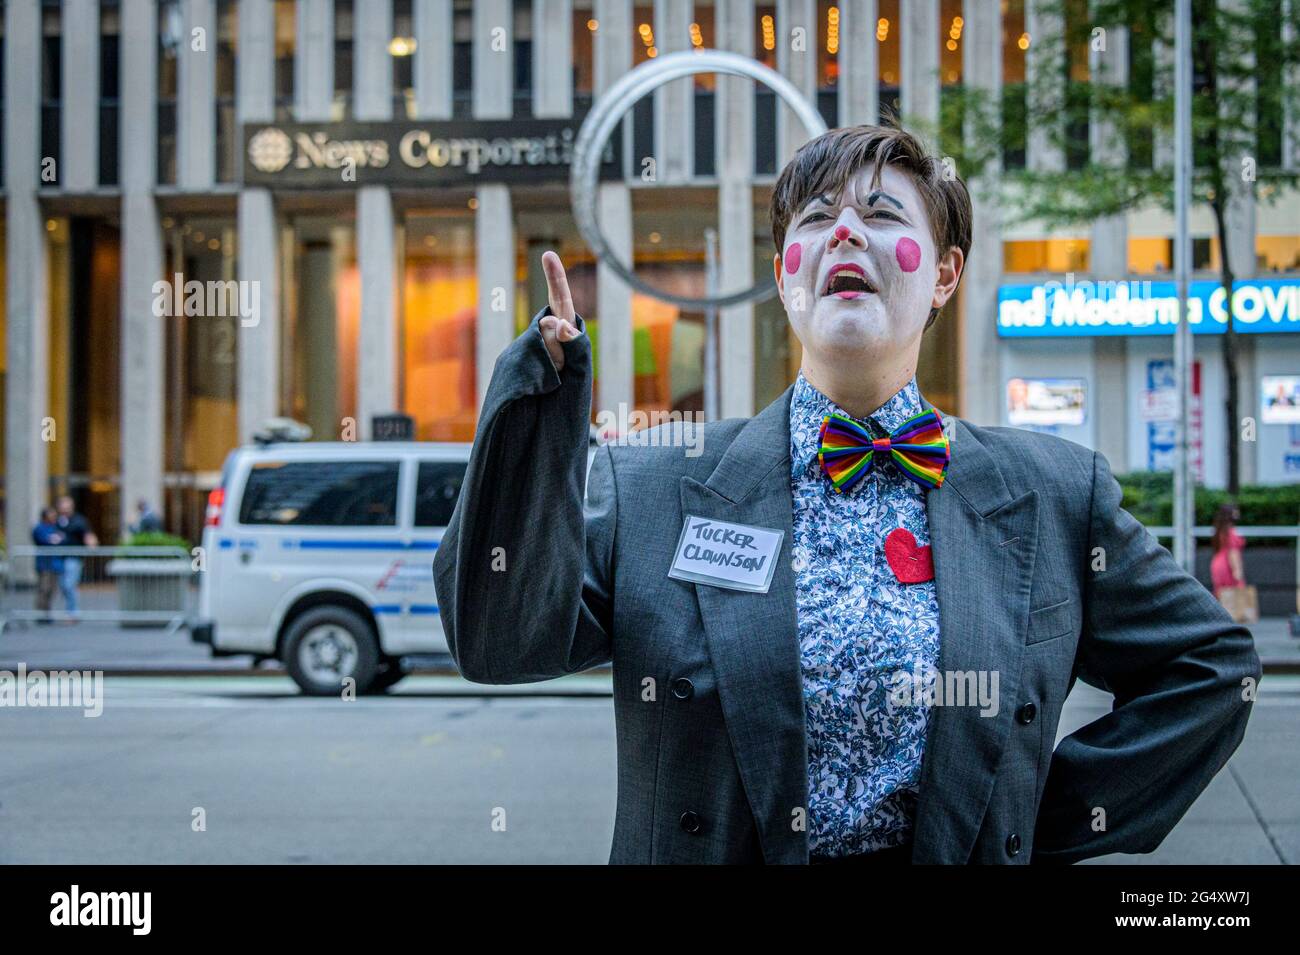 USA. 23rd June, 2021. A group of activists dressed as clowns held a street protest on June 23, 2021 outside Fox News Headquarters in Manhattan. In their opinion, Fox News has been treating our democracy like a circus, so they decided to bring the circus to their doorstep. (Photo by Erik McGregor/Sipa USA) Credit: Sipa USA/Alamy Live News Stock Photo